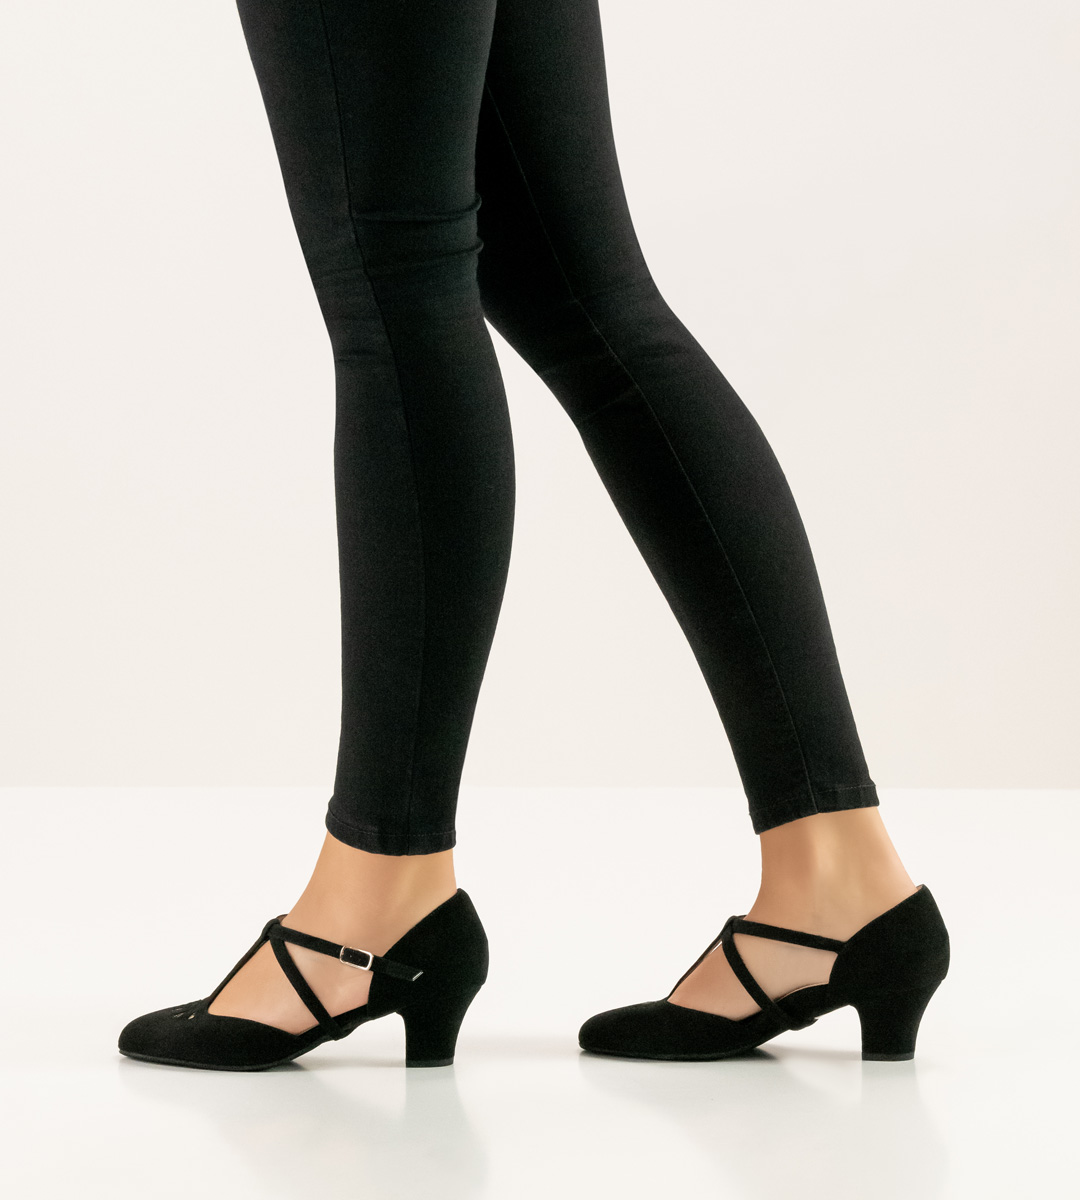 Werner Kern ladies dance shoe in black velour combined with black trousers